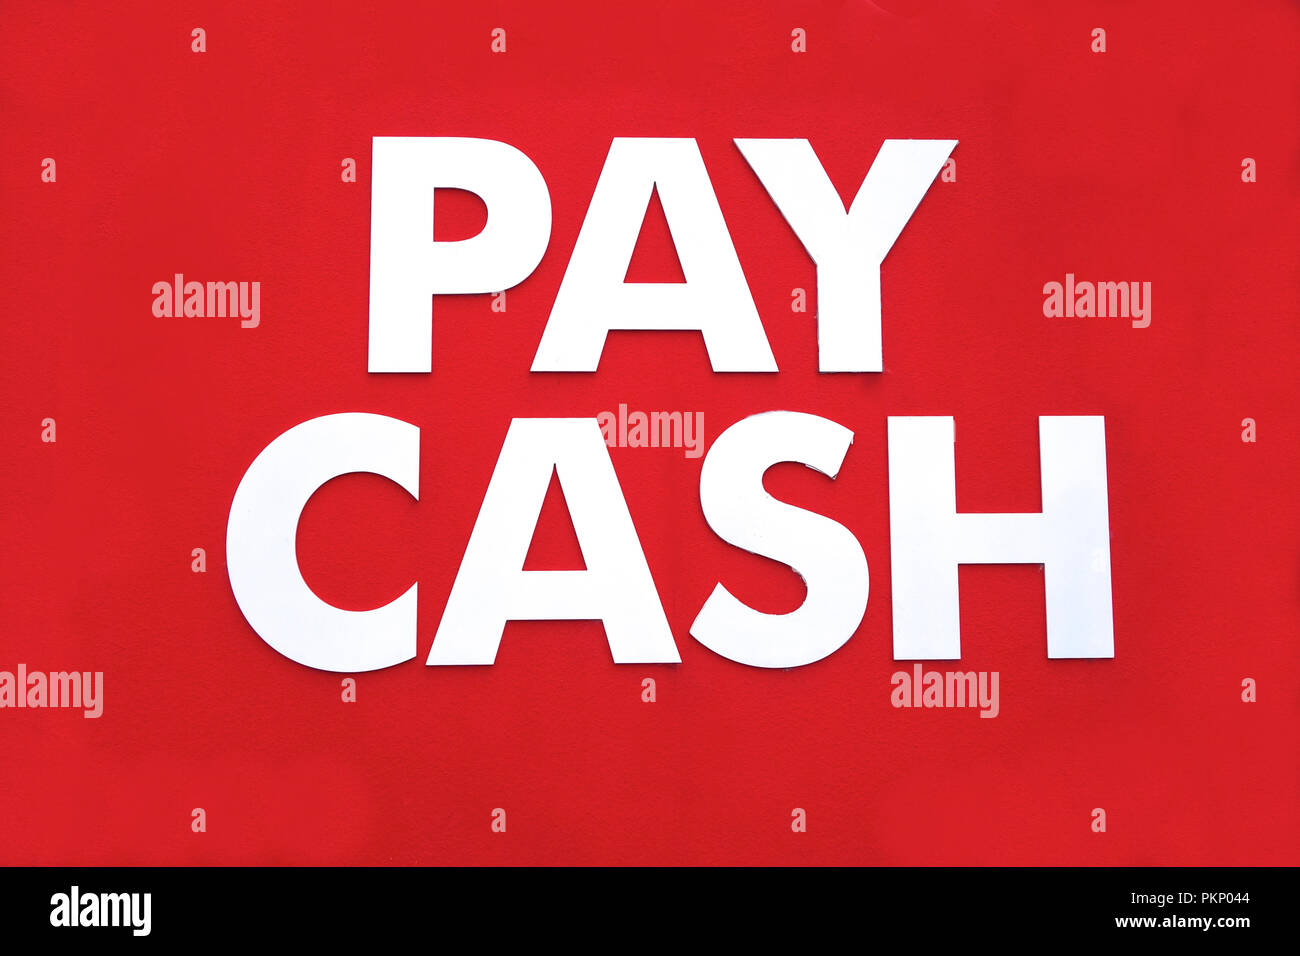 Pay cash signage outside a retail shop. Stock Photo